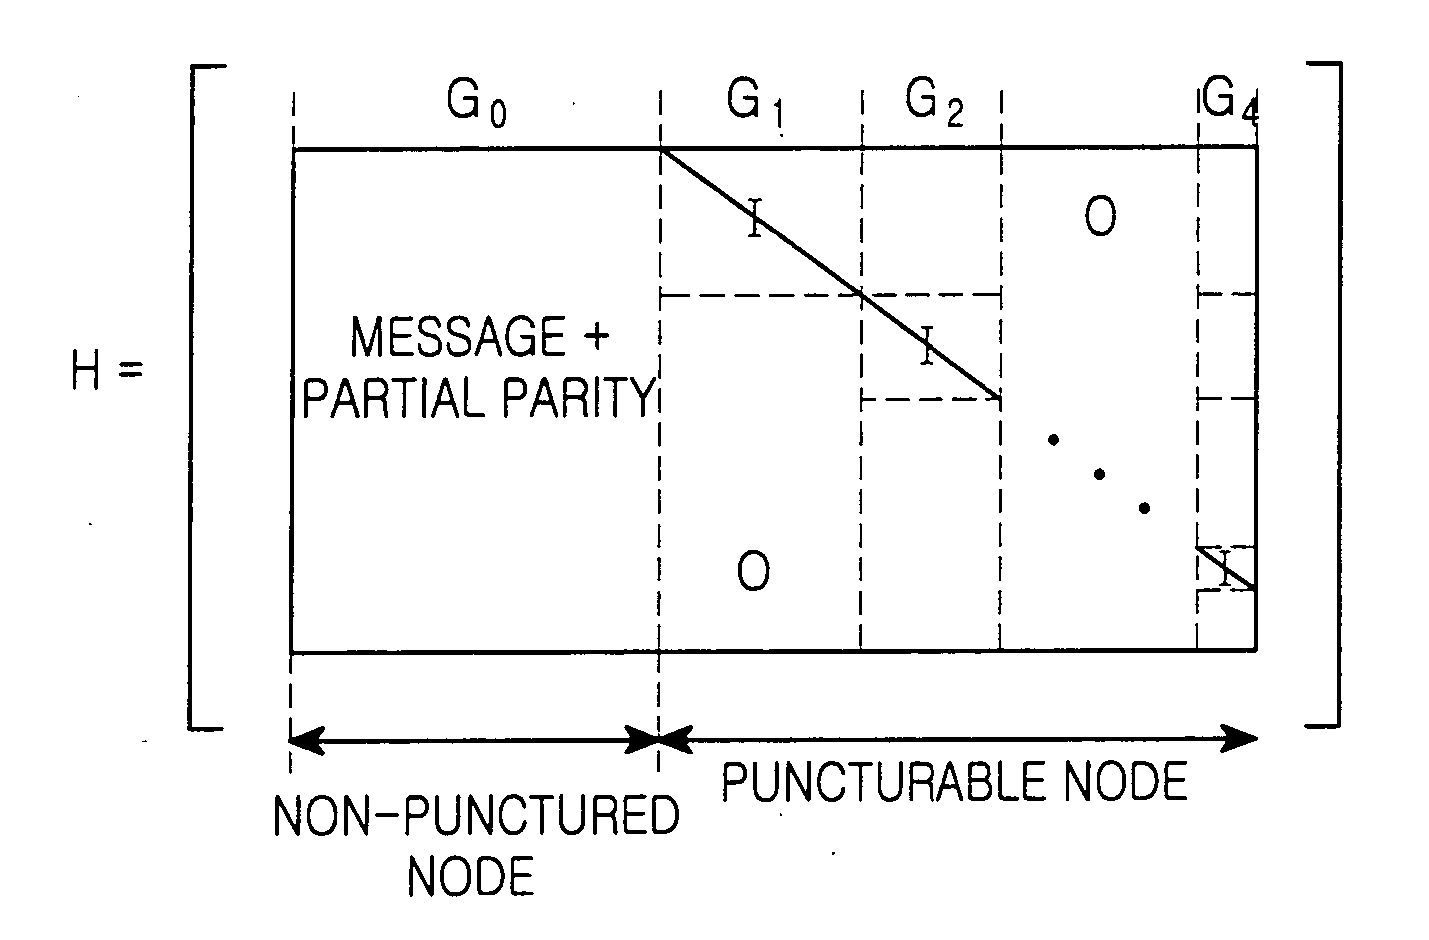 Method for puncturing an LDPC channel code